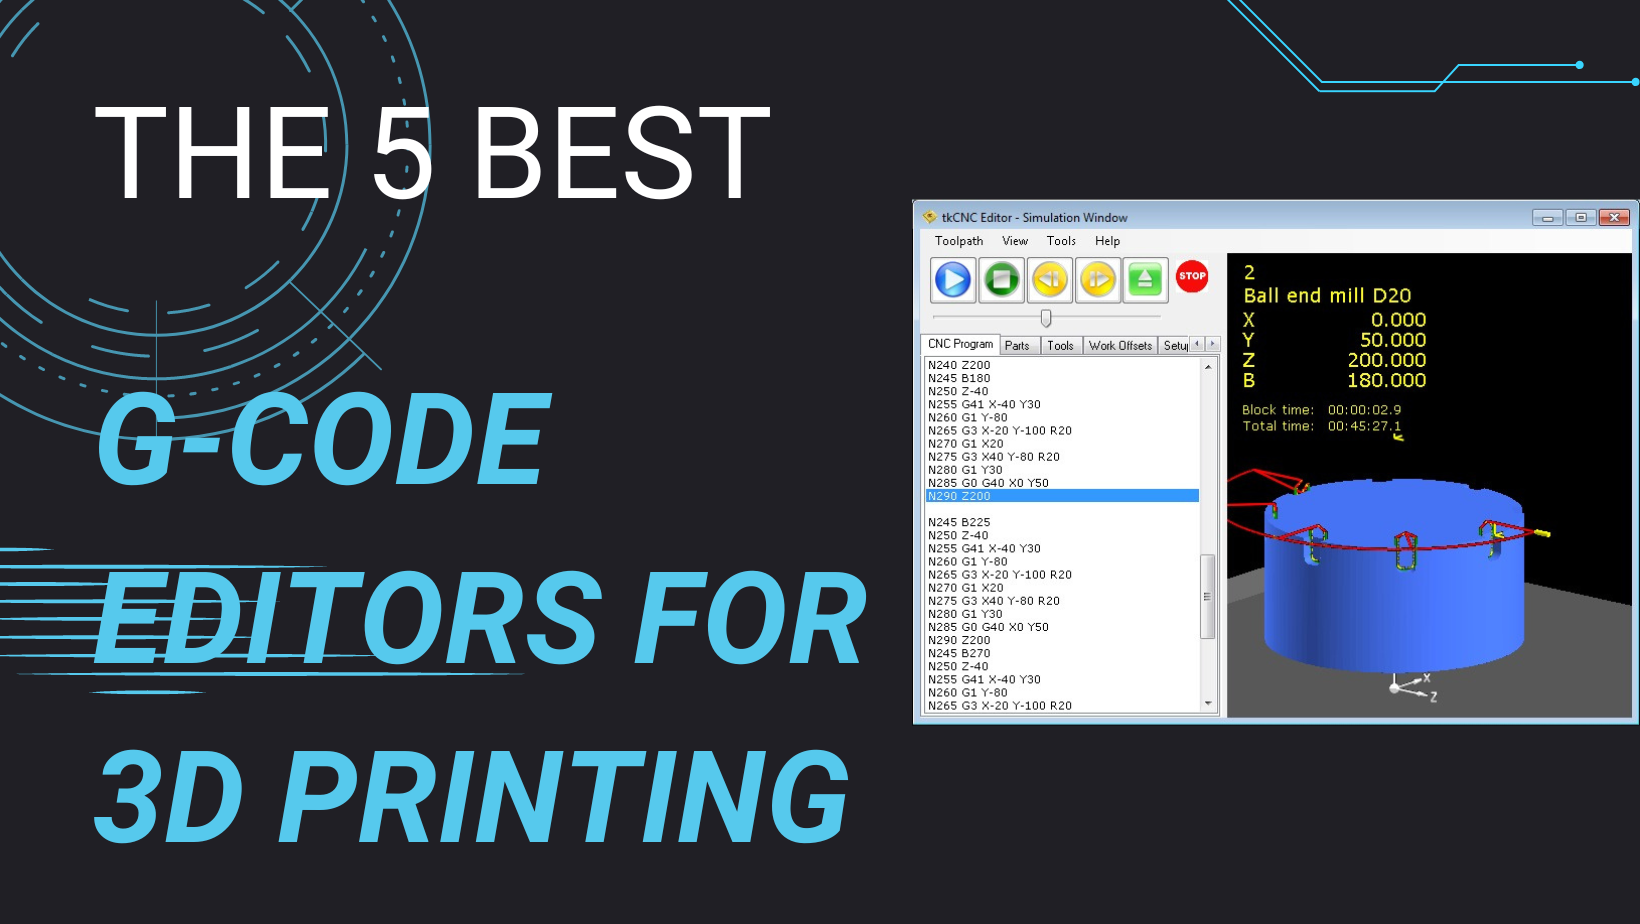 The 5 Best G-code Editors for 3D Printing